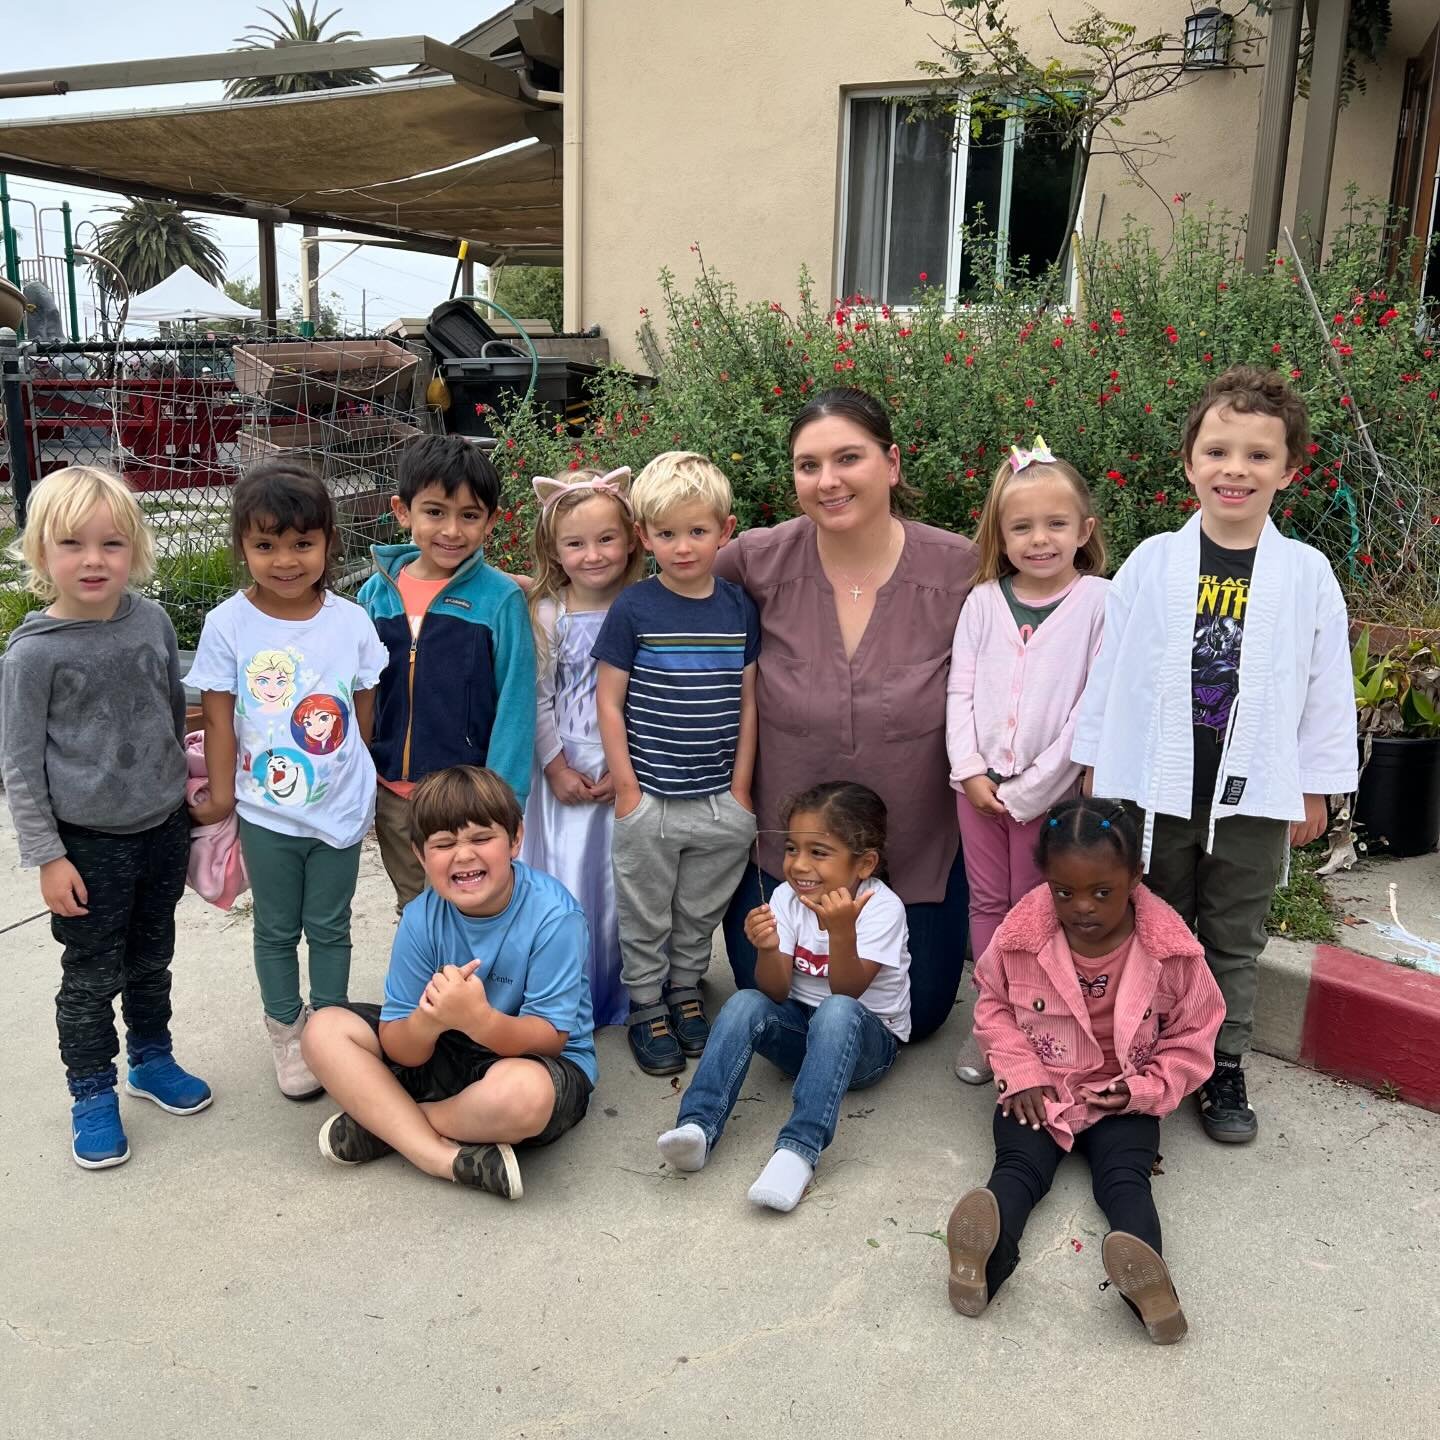 Miss Lily and Mr Miguel have the privilege of getting your children ready for kindergarten! They have set up their classrooms for learning and growth through table work, activity stations, dramatic play areas, and much more!